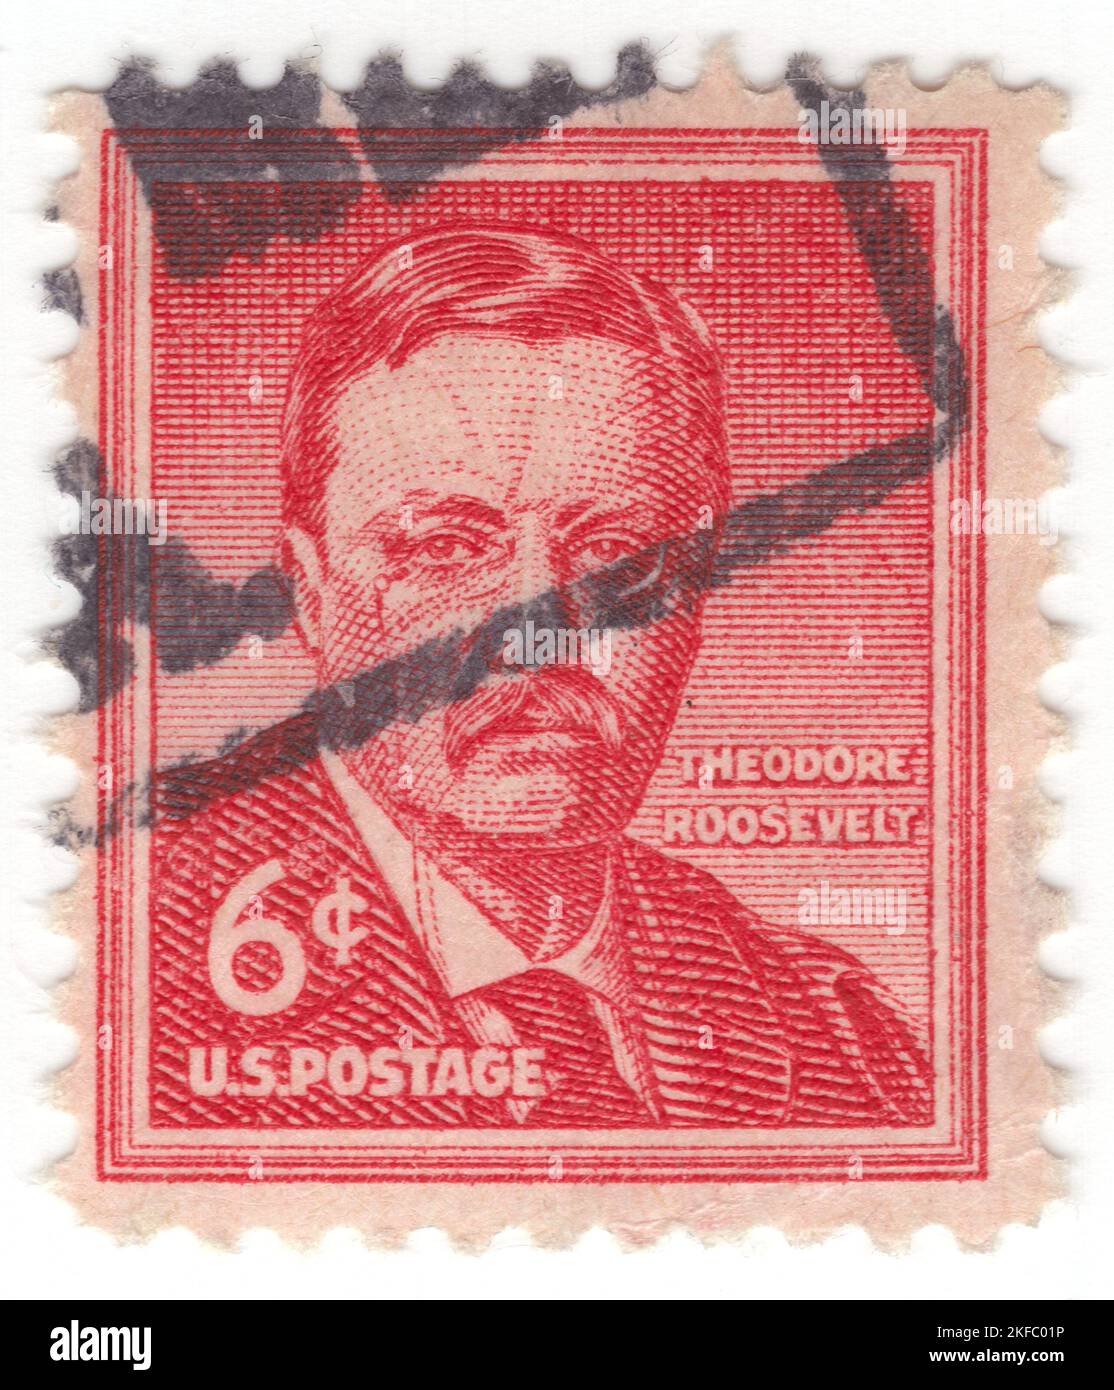 USA - 1955: An 6 cents carmine postage stamp depicting portrait of Theodore Roosevelt Jr., often referred to as Teddy or by his initials, T. R., was an American politician, statesman, soldier, conservationist, naturalist, historian, and writer who served as the 26th president of the United States from 1901 to 1909. He previously served as the 25th vice president under President William McKinley from March to September 1901 and as the 33rd governor of New York from 1899 to 1900. Assuming the presidency after McKinley's assassination, Roosevelt emerged as a leader of the Republican Party Stock Photo